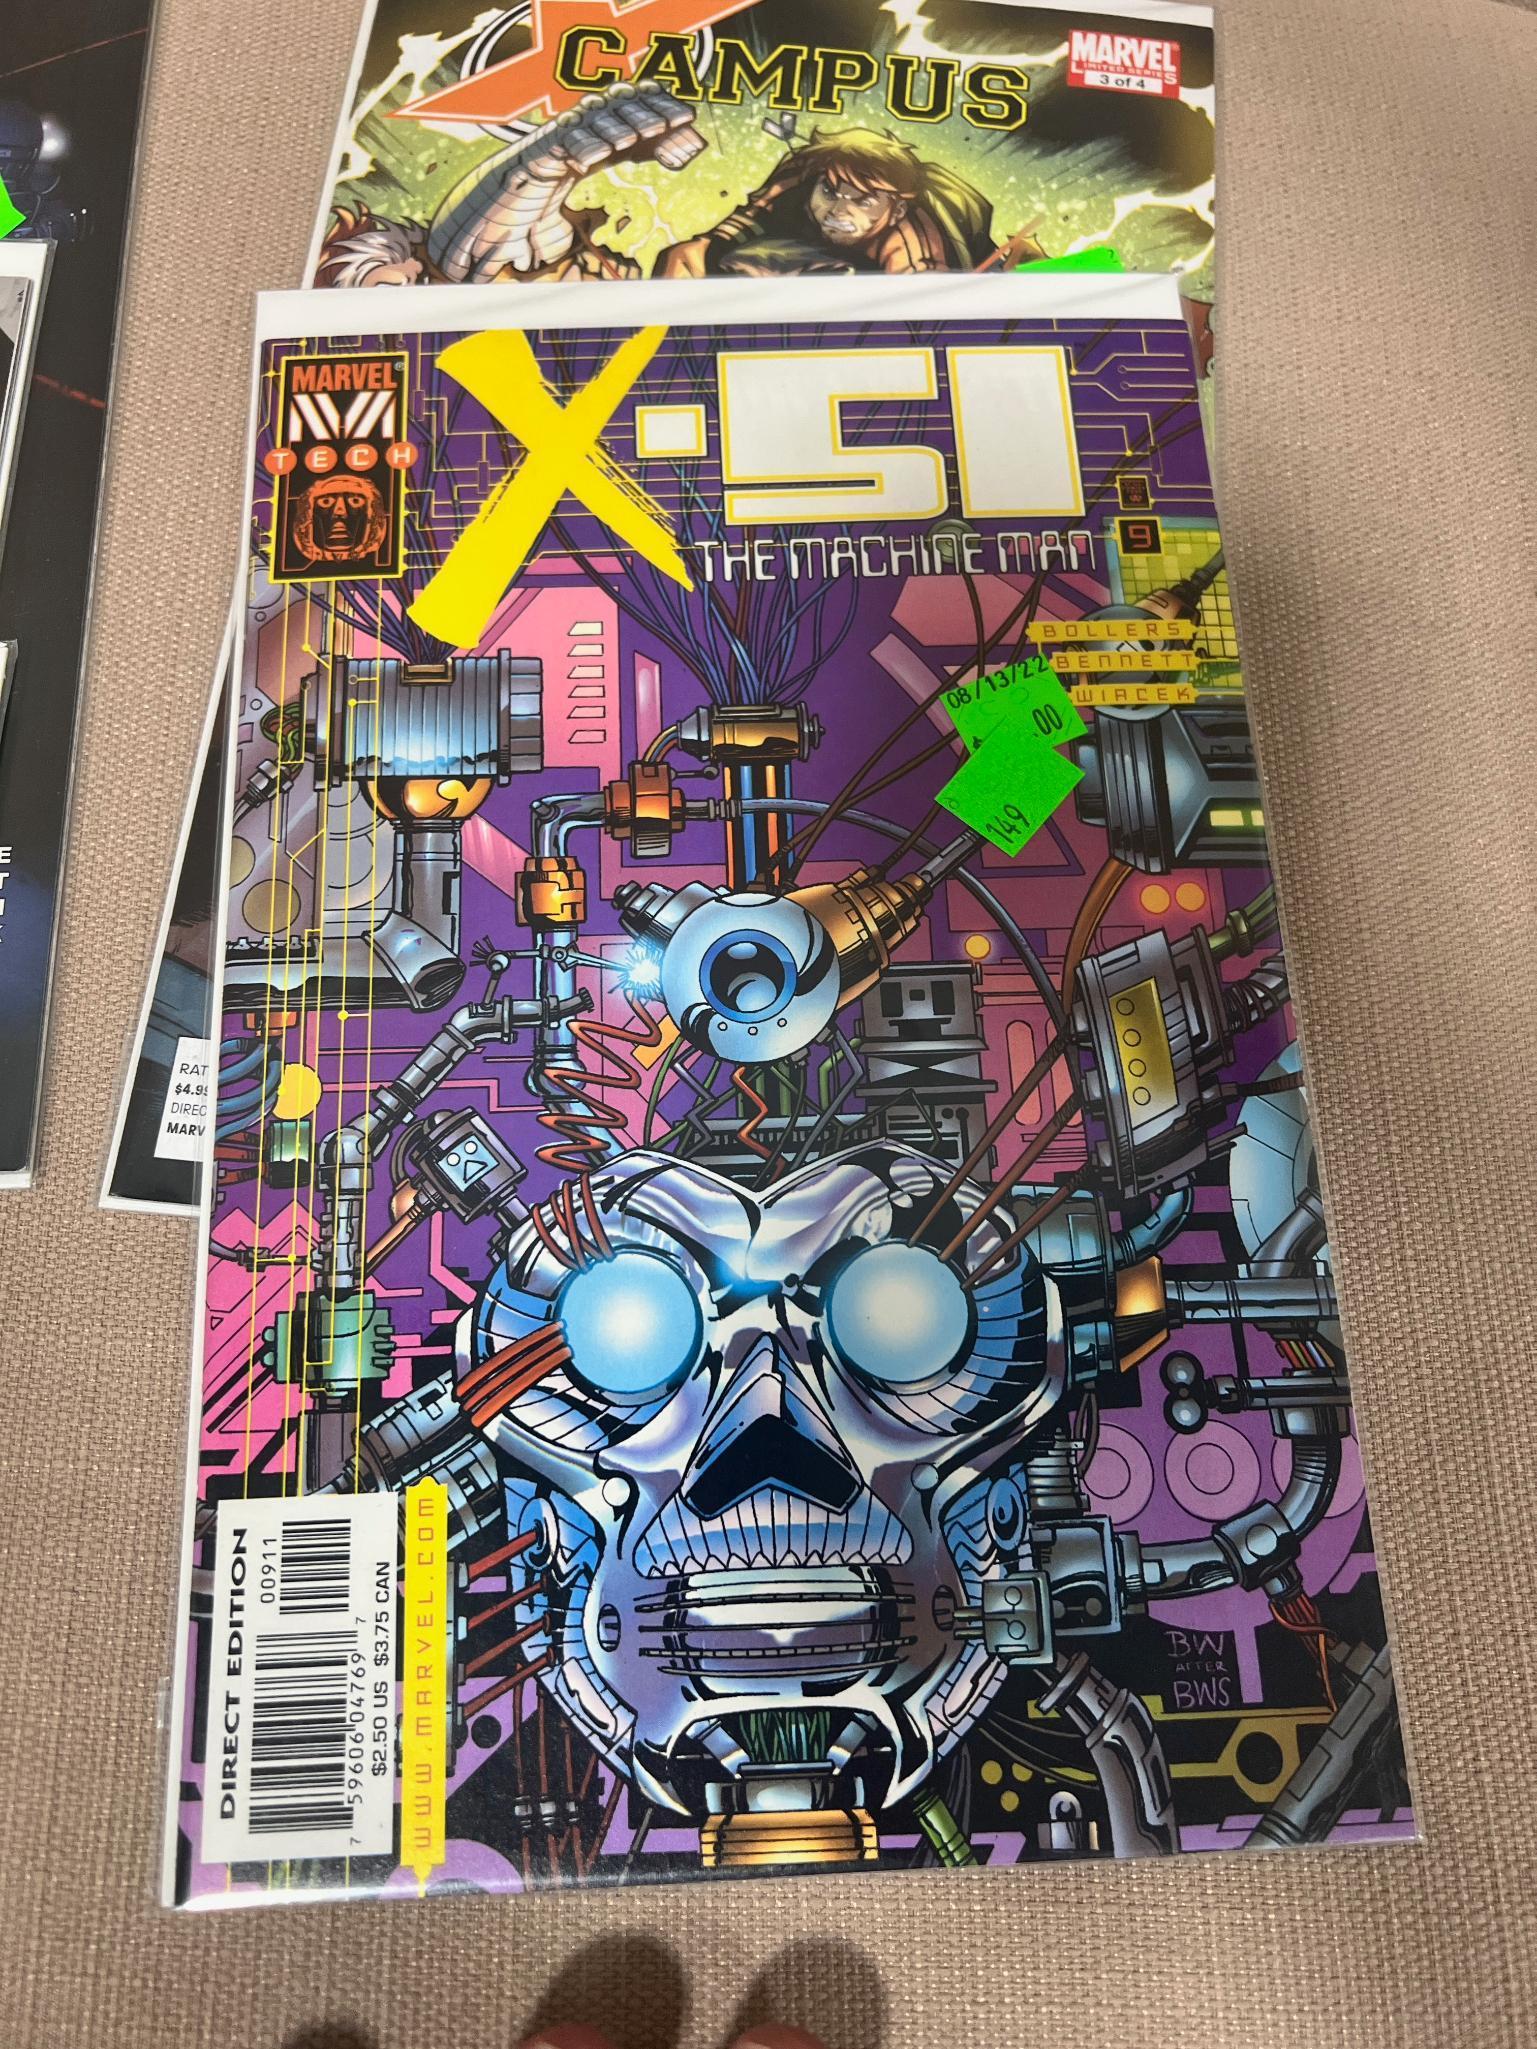 Lot of Asst. X Force and X-51 Comic Books among others